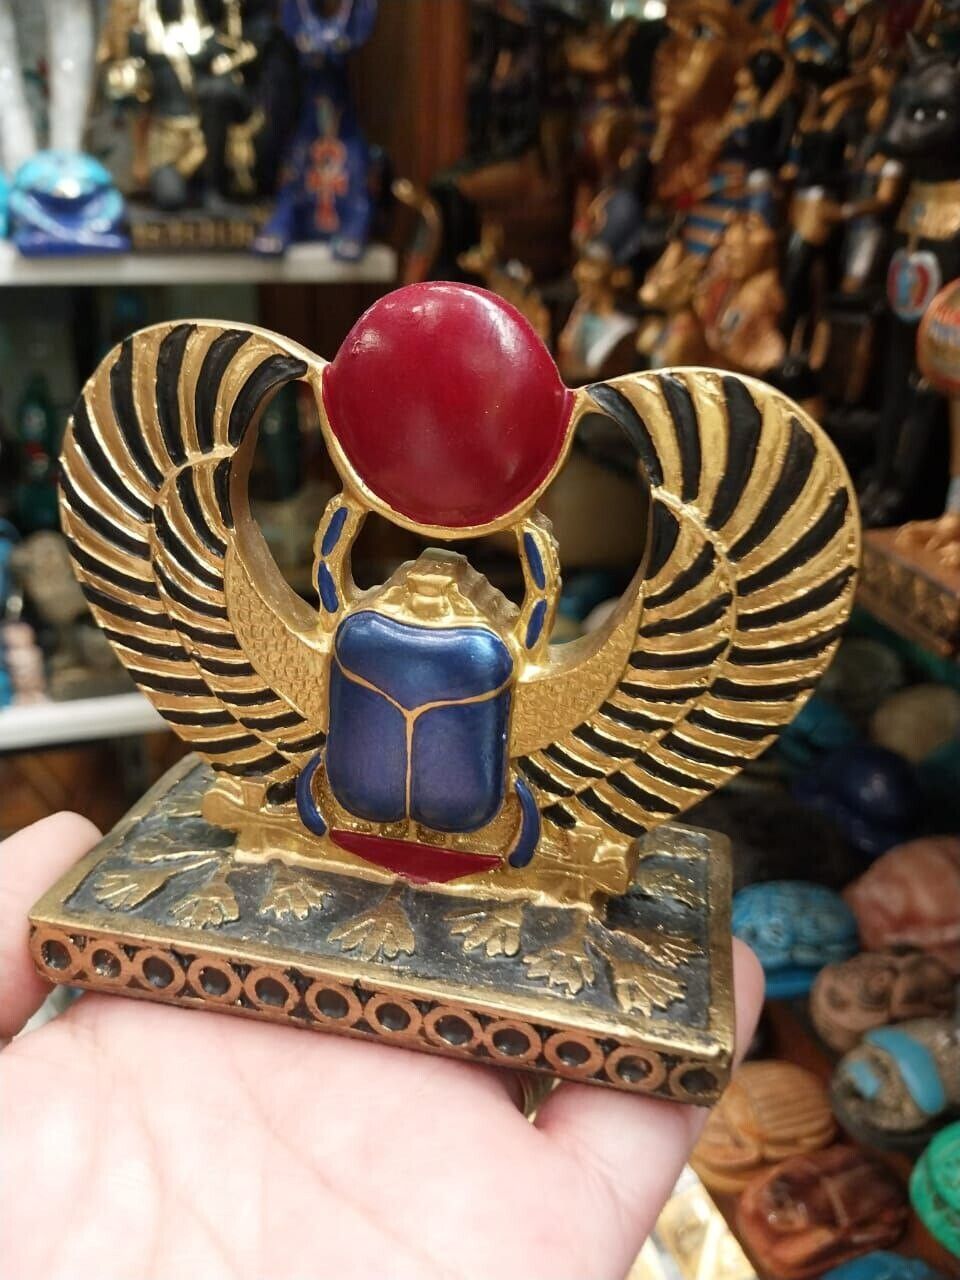 Rare Winged Scarab Antique ANCIENT EGYPTIAN PHARAONIC ANTIQUE ROYAL Scarab